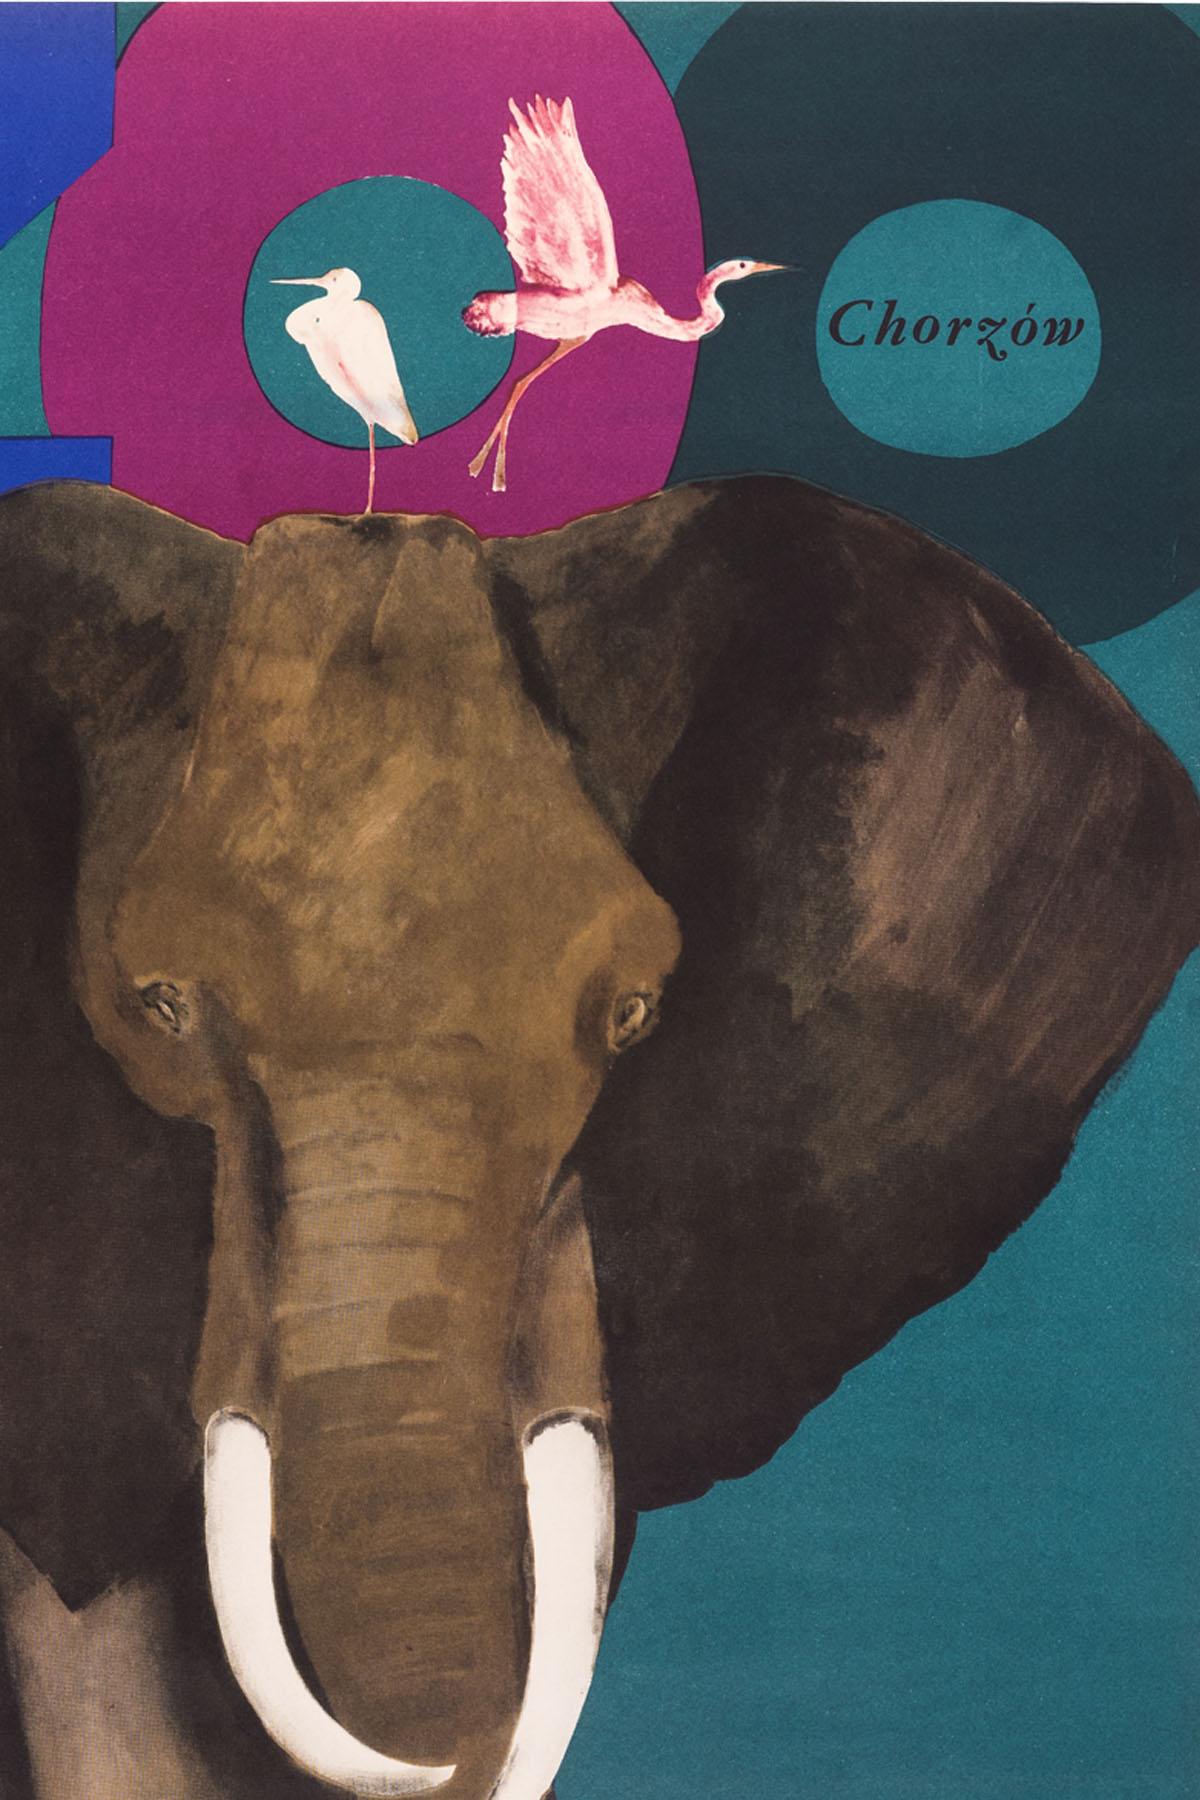 A poster for the Chorzów zoo by Polish artist Marek Mosinski coming from the private archive of the designer after having been acquired directly from the Mosinski family.